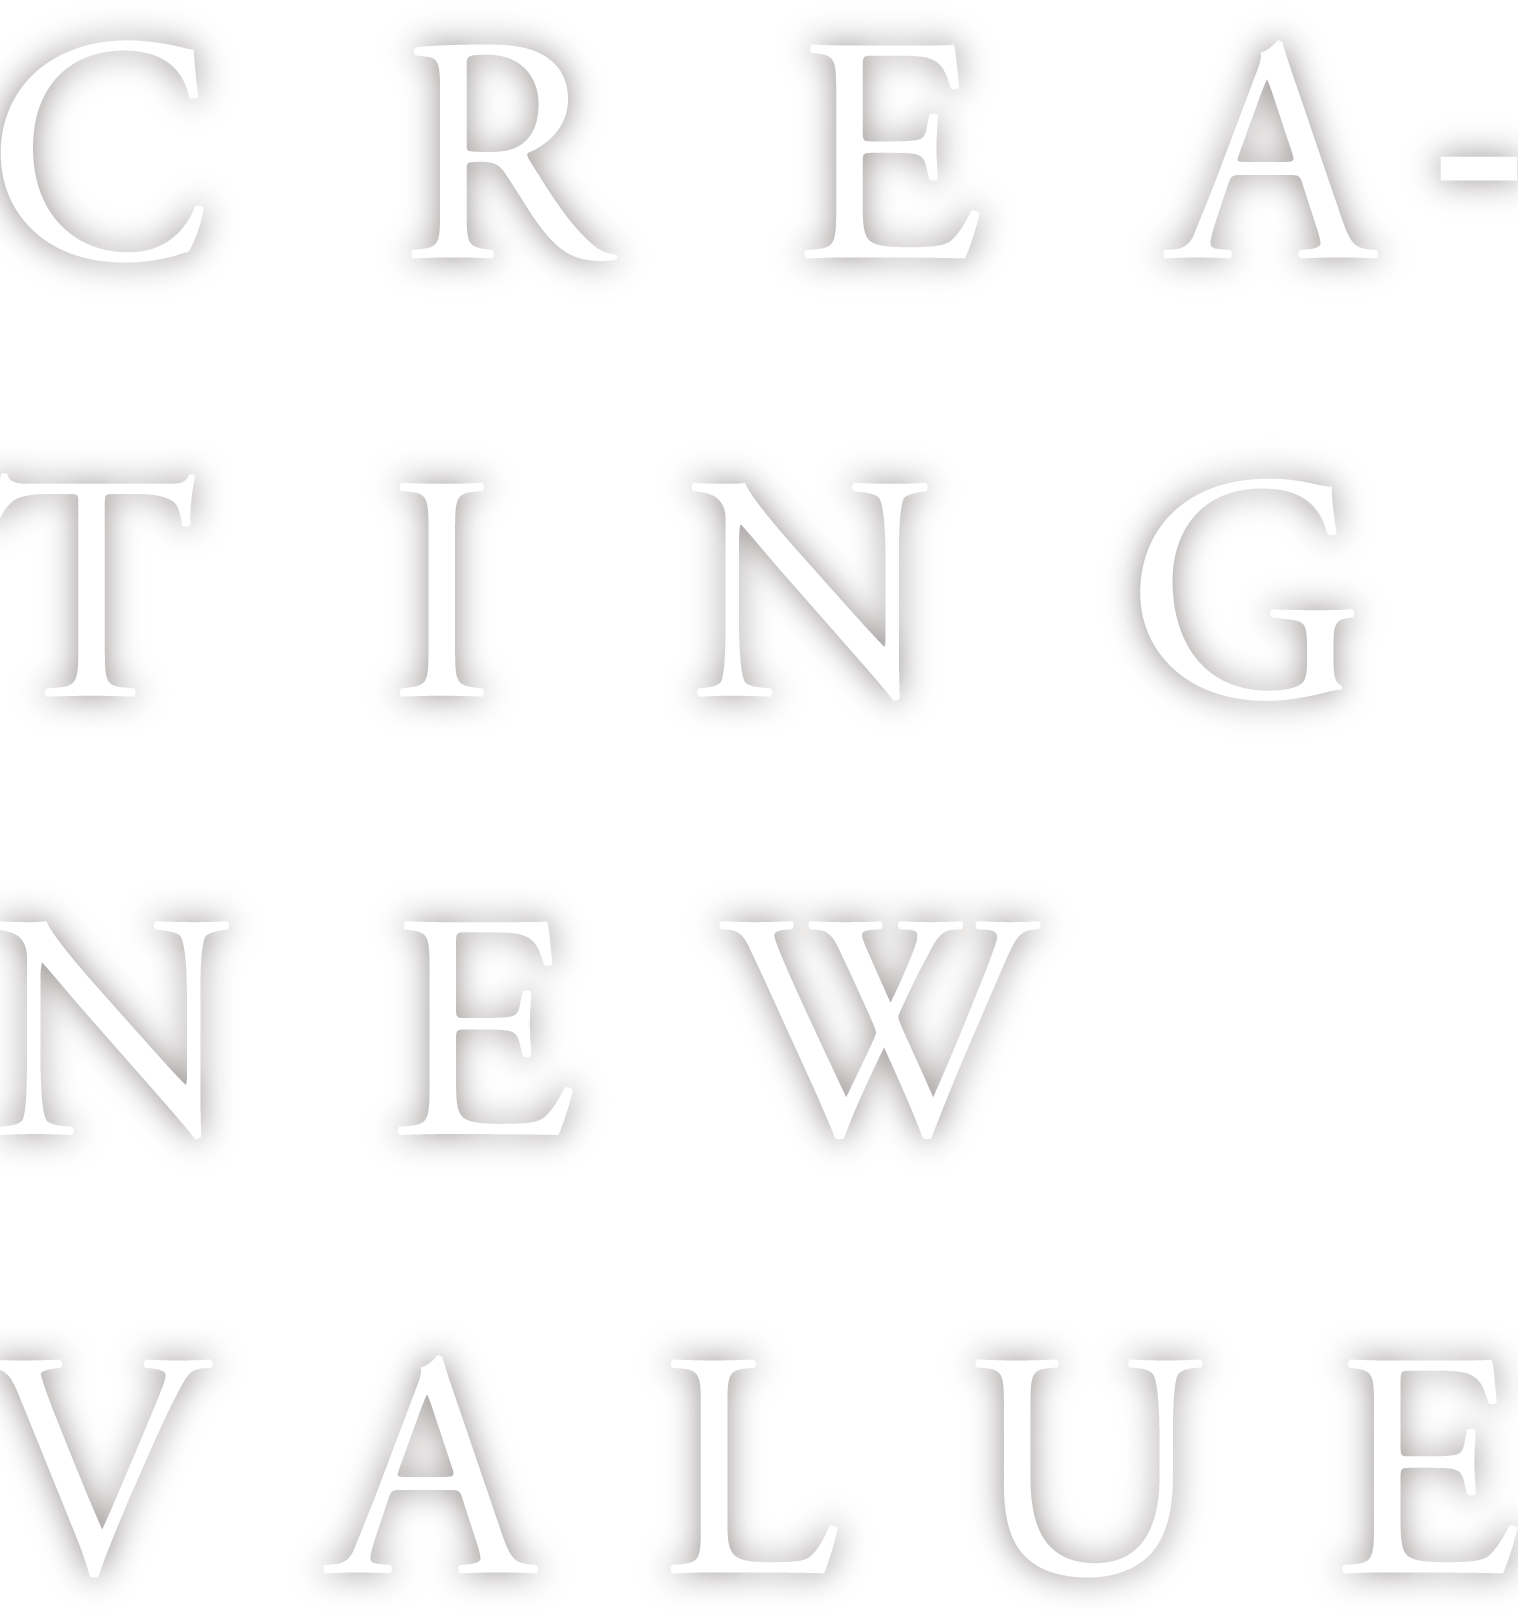 CREATING NEW VALUE